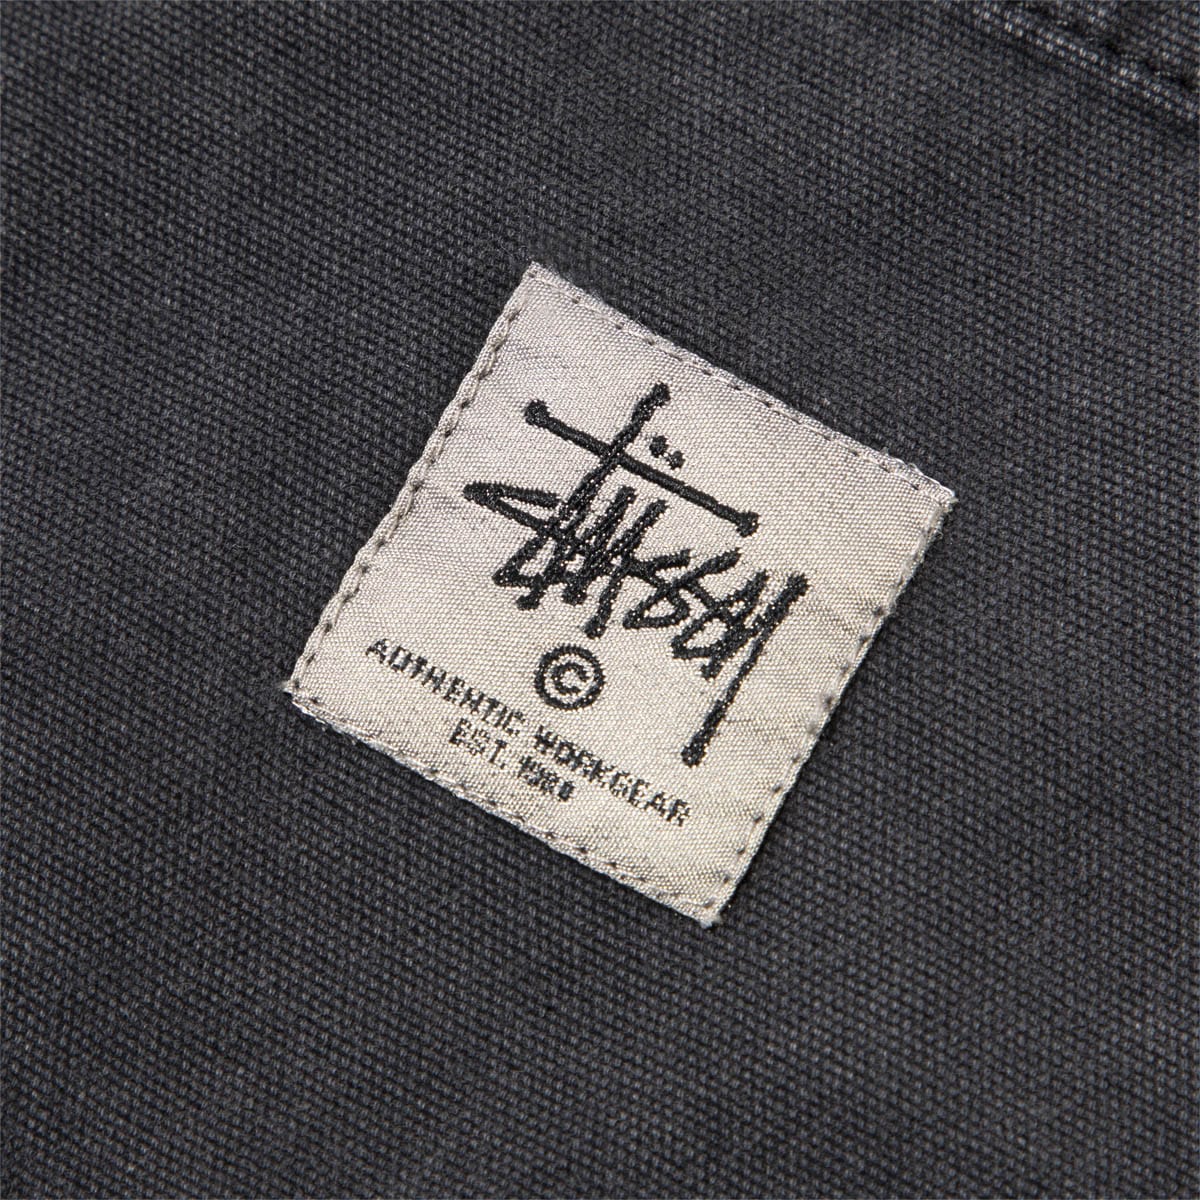 WASHED CANVAS WORK PANT